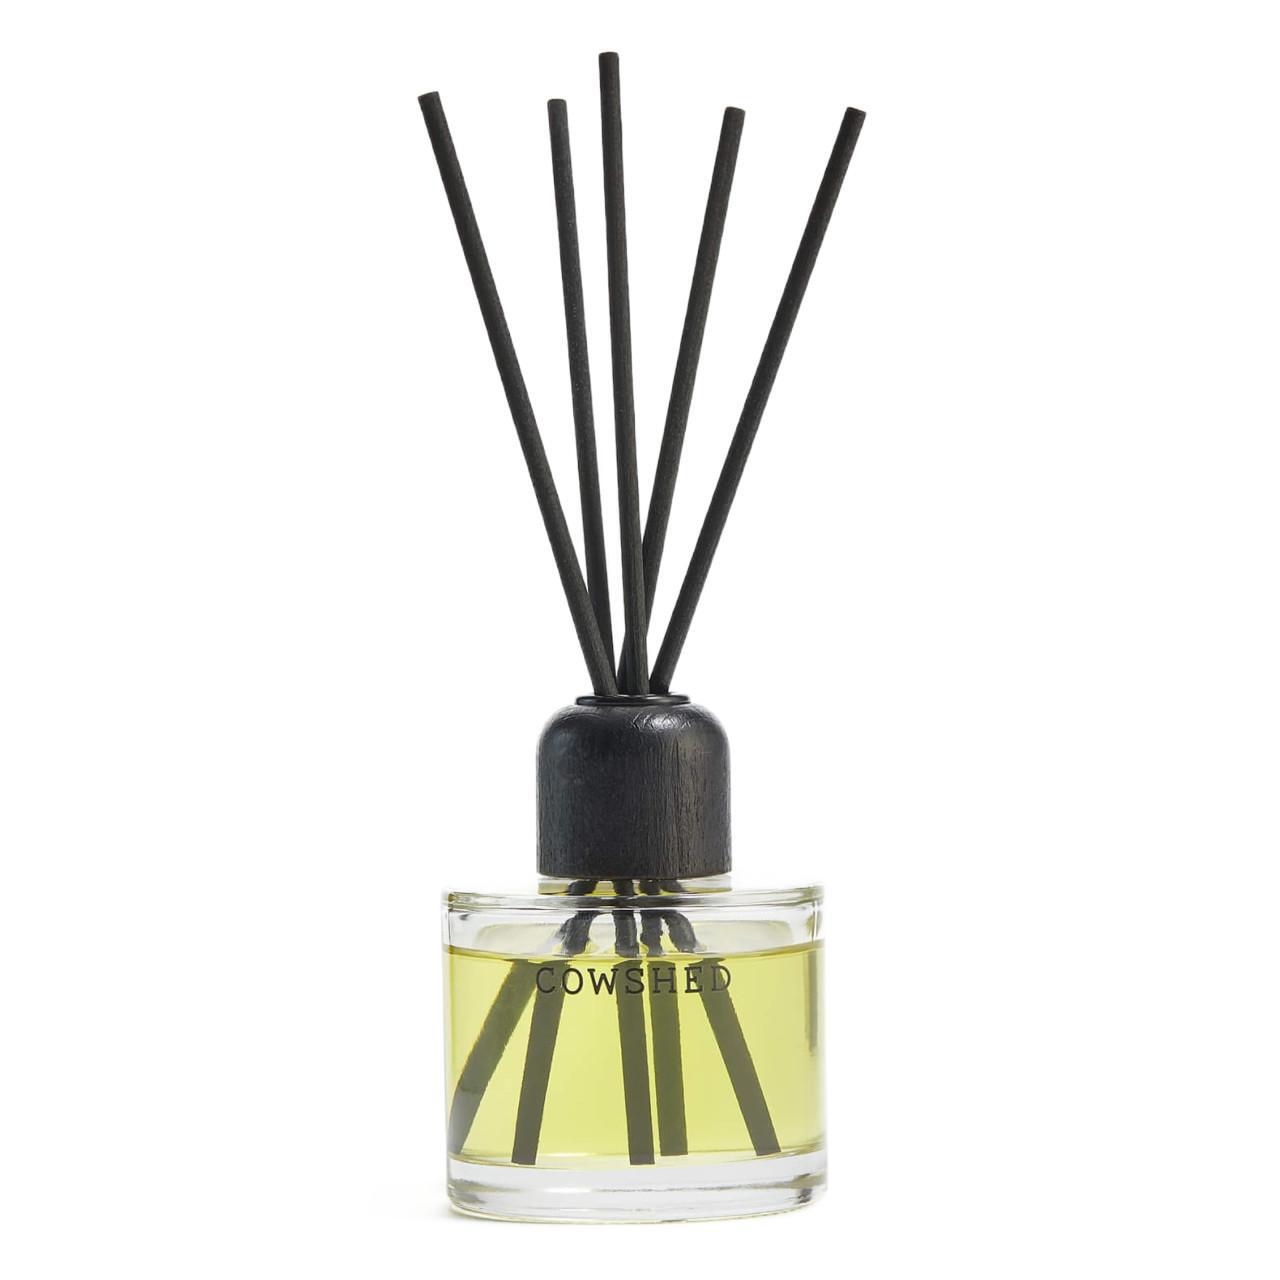 Cowshed Active Diffuser 100ml